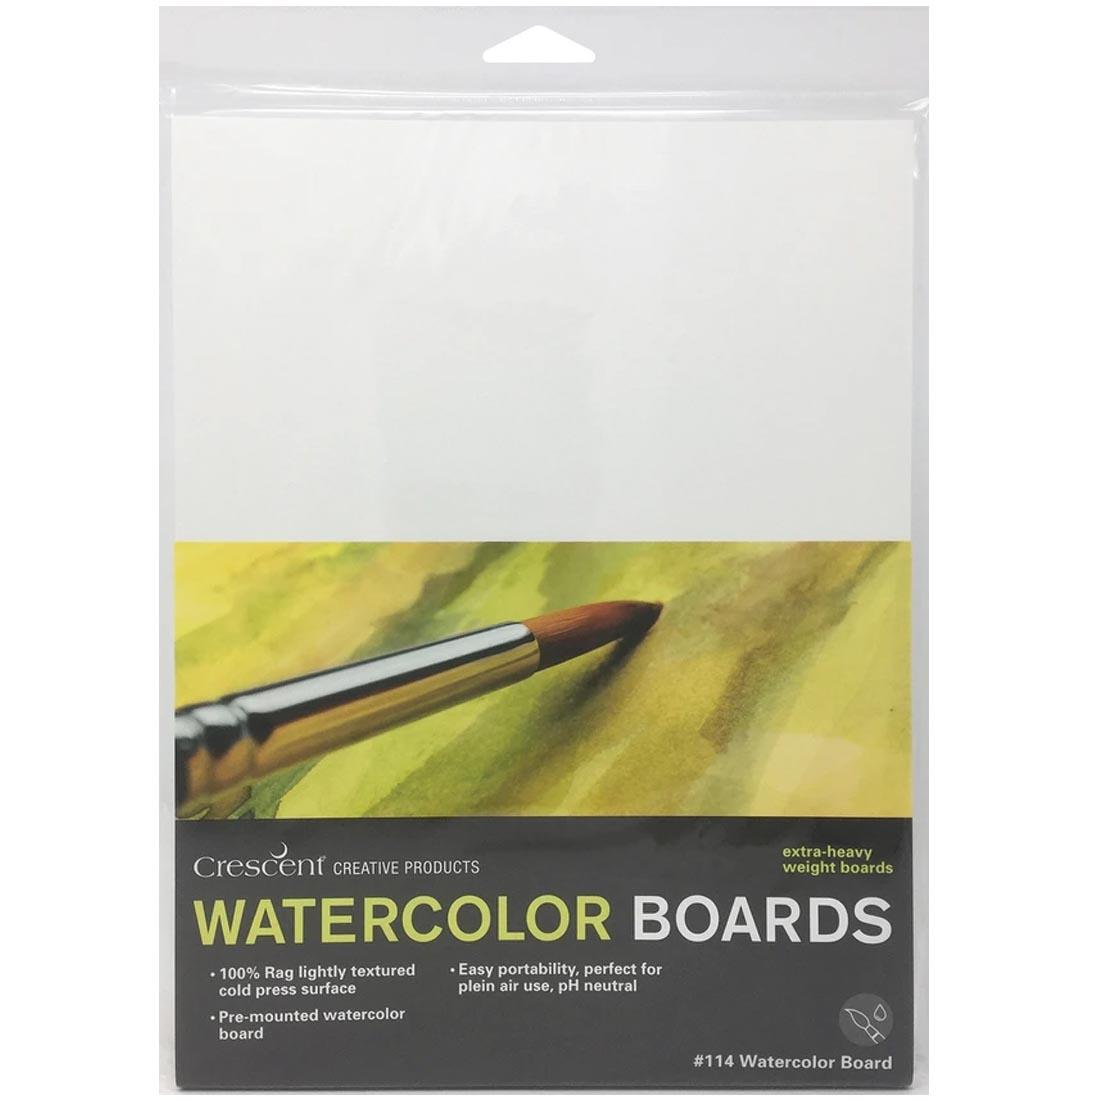 Package of Crescent #114 Watercolor Board